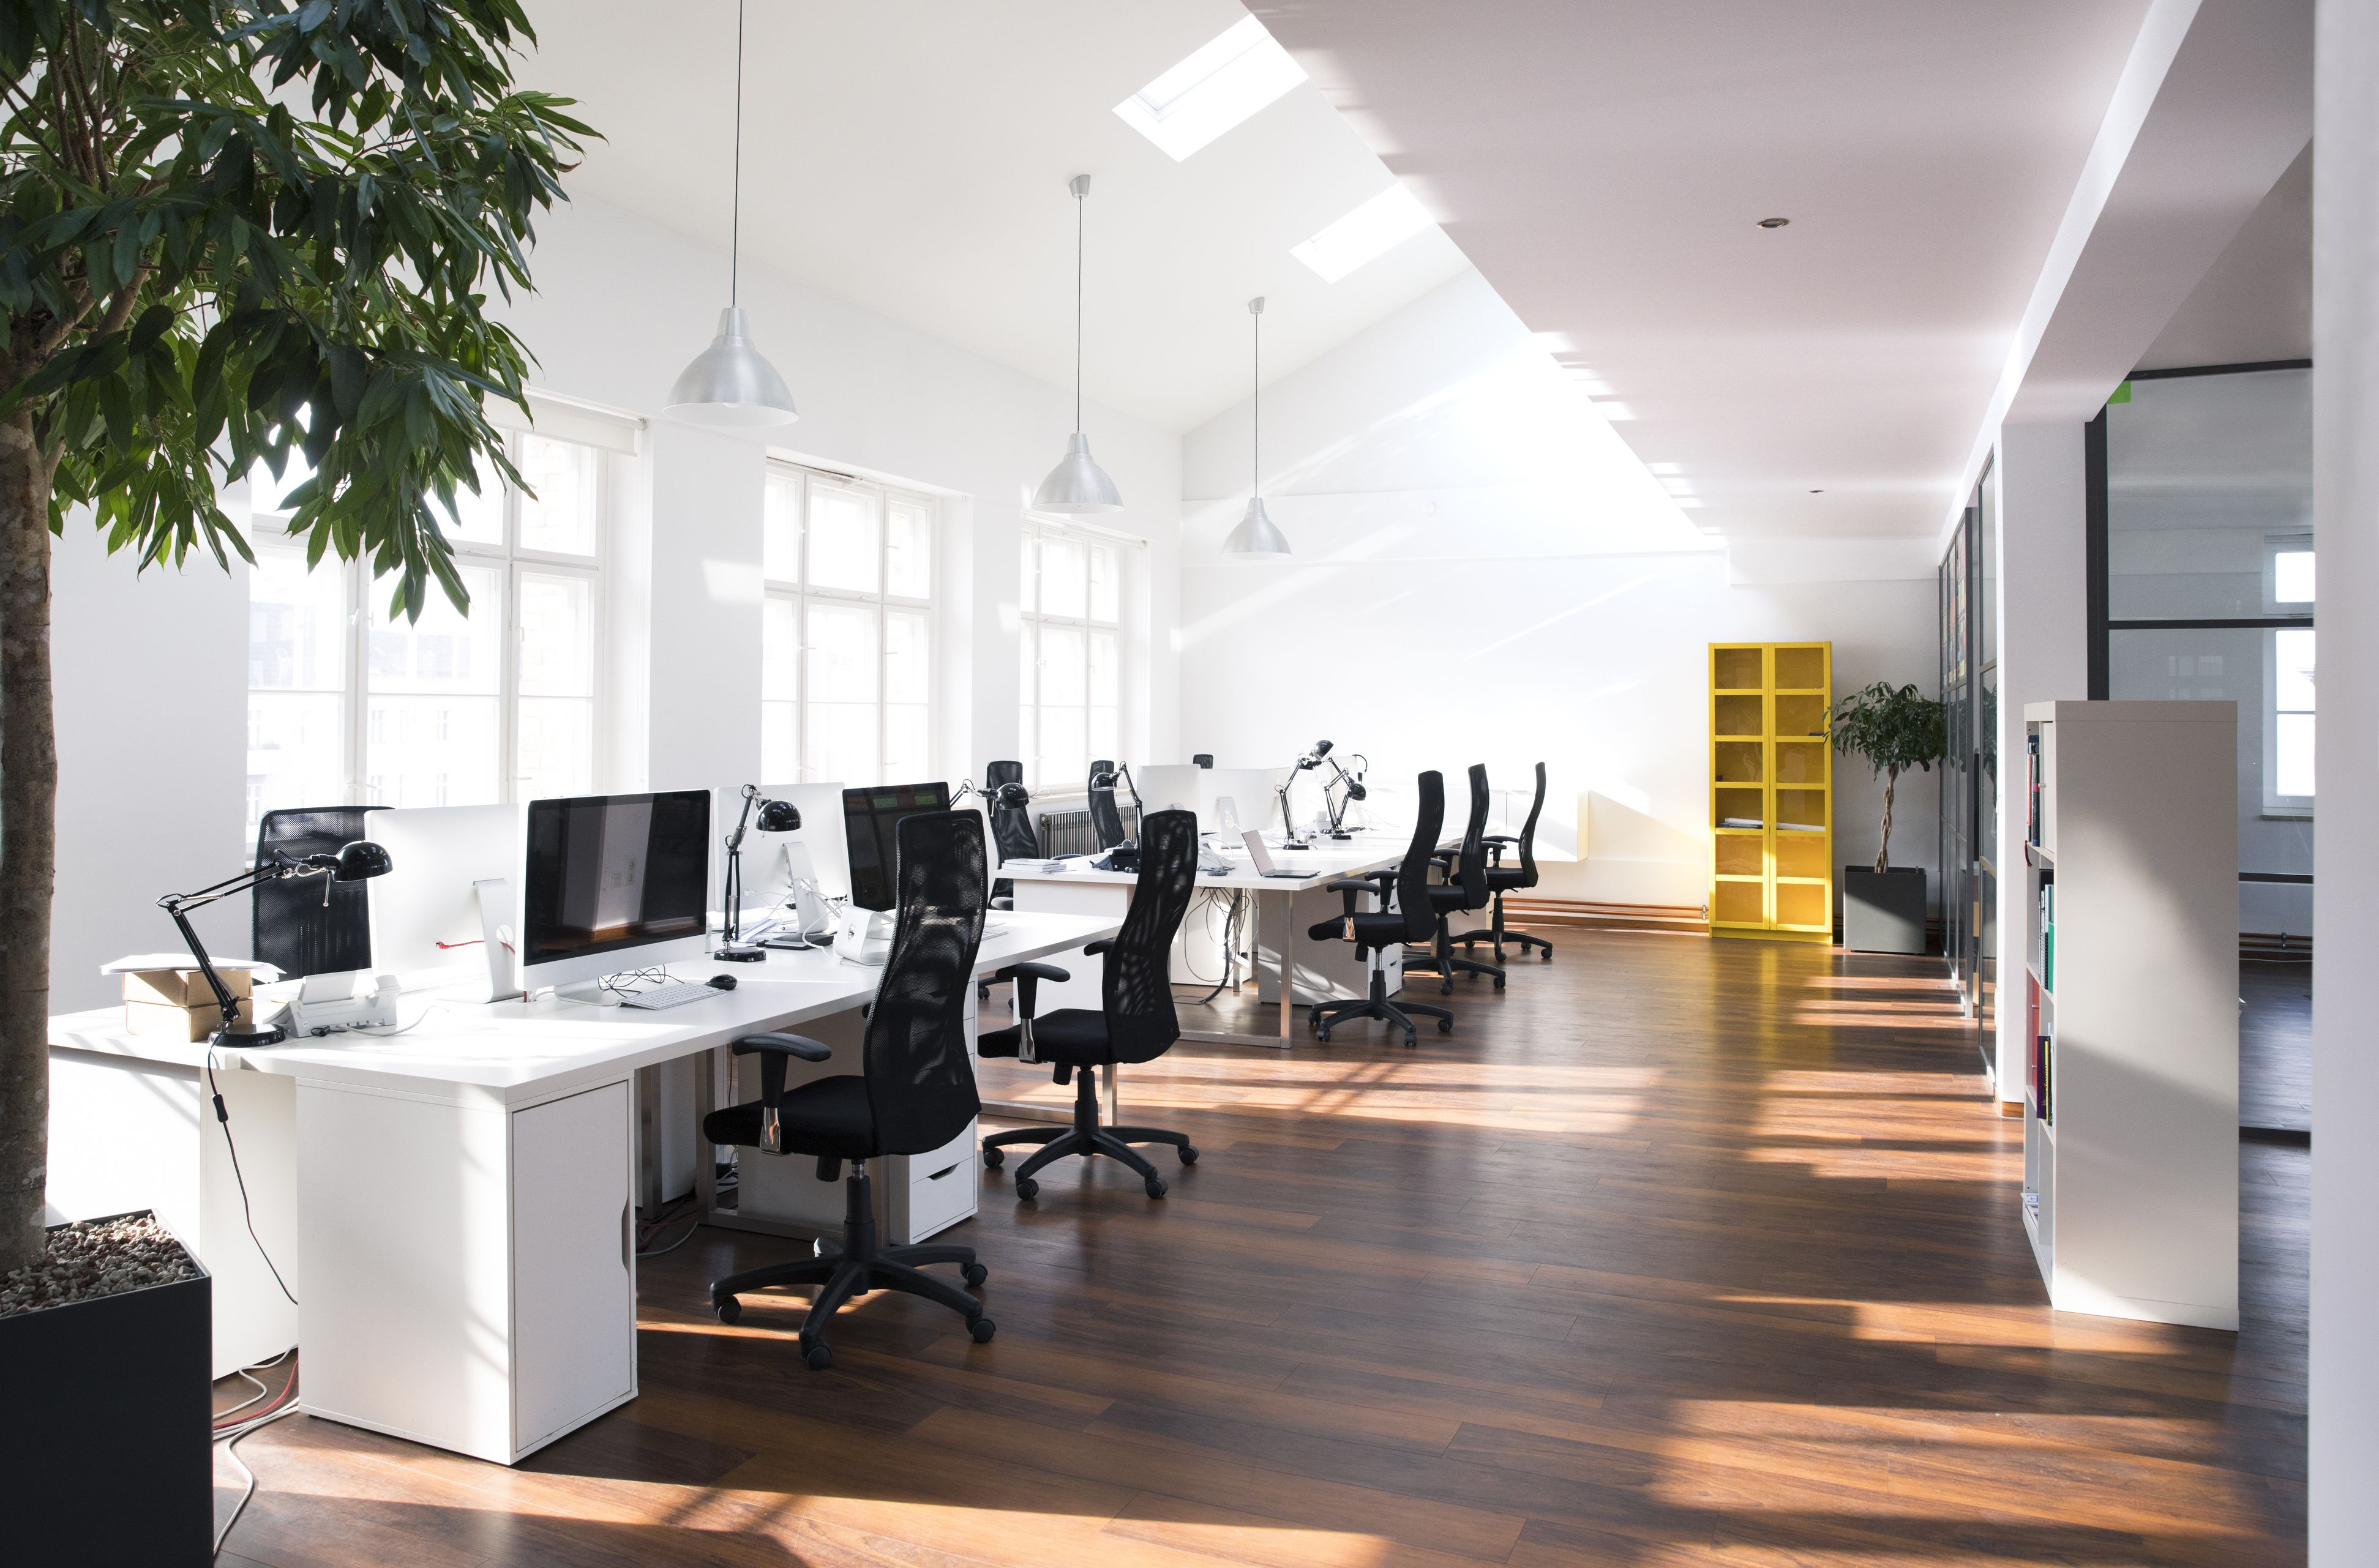 hardwood flooring business names of learn about inactive business intended for desks with pcs in bright and modern open space office 898700298 5b089141fa6bcc0037c8f785